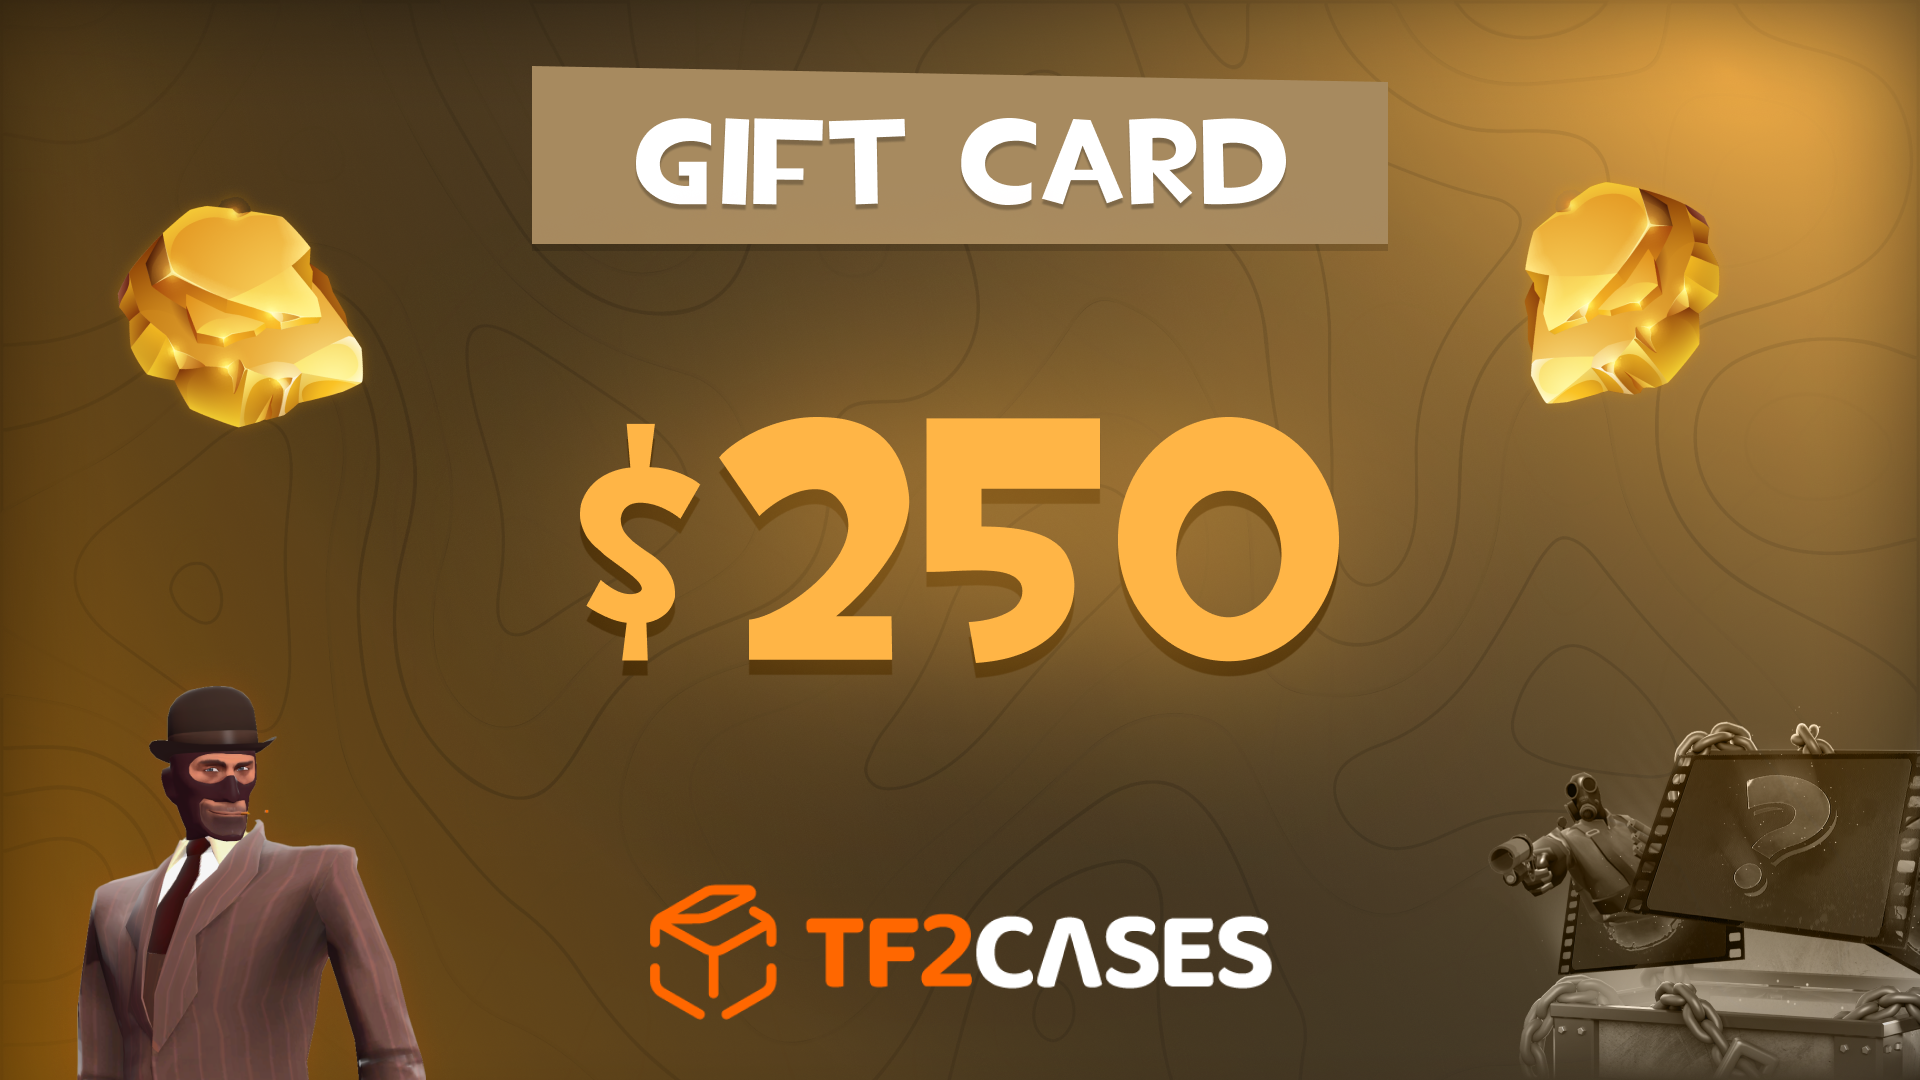 TF2CASES.com $250 Gift Card